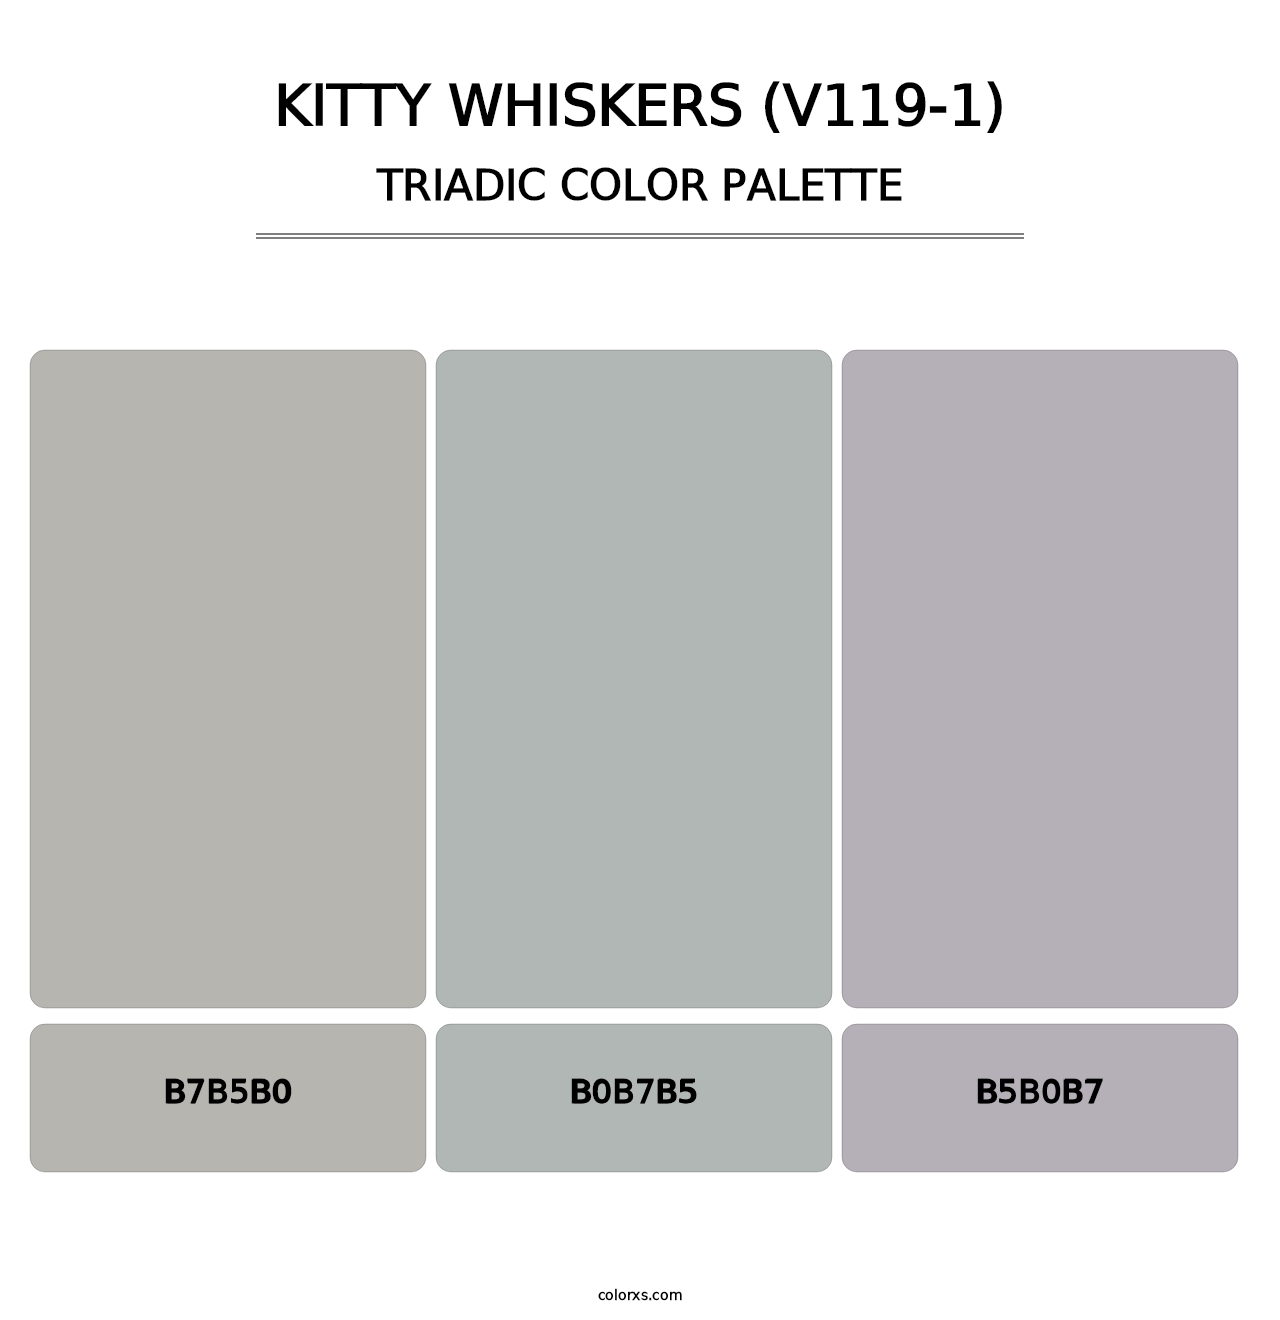 Kitty Whiskers (V119-1) - Triadic Color Palette